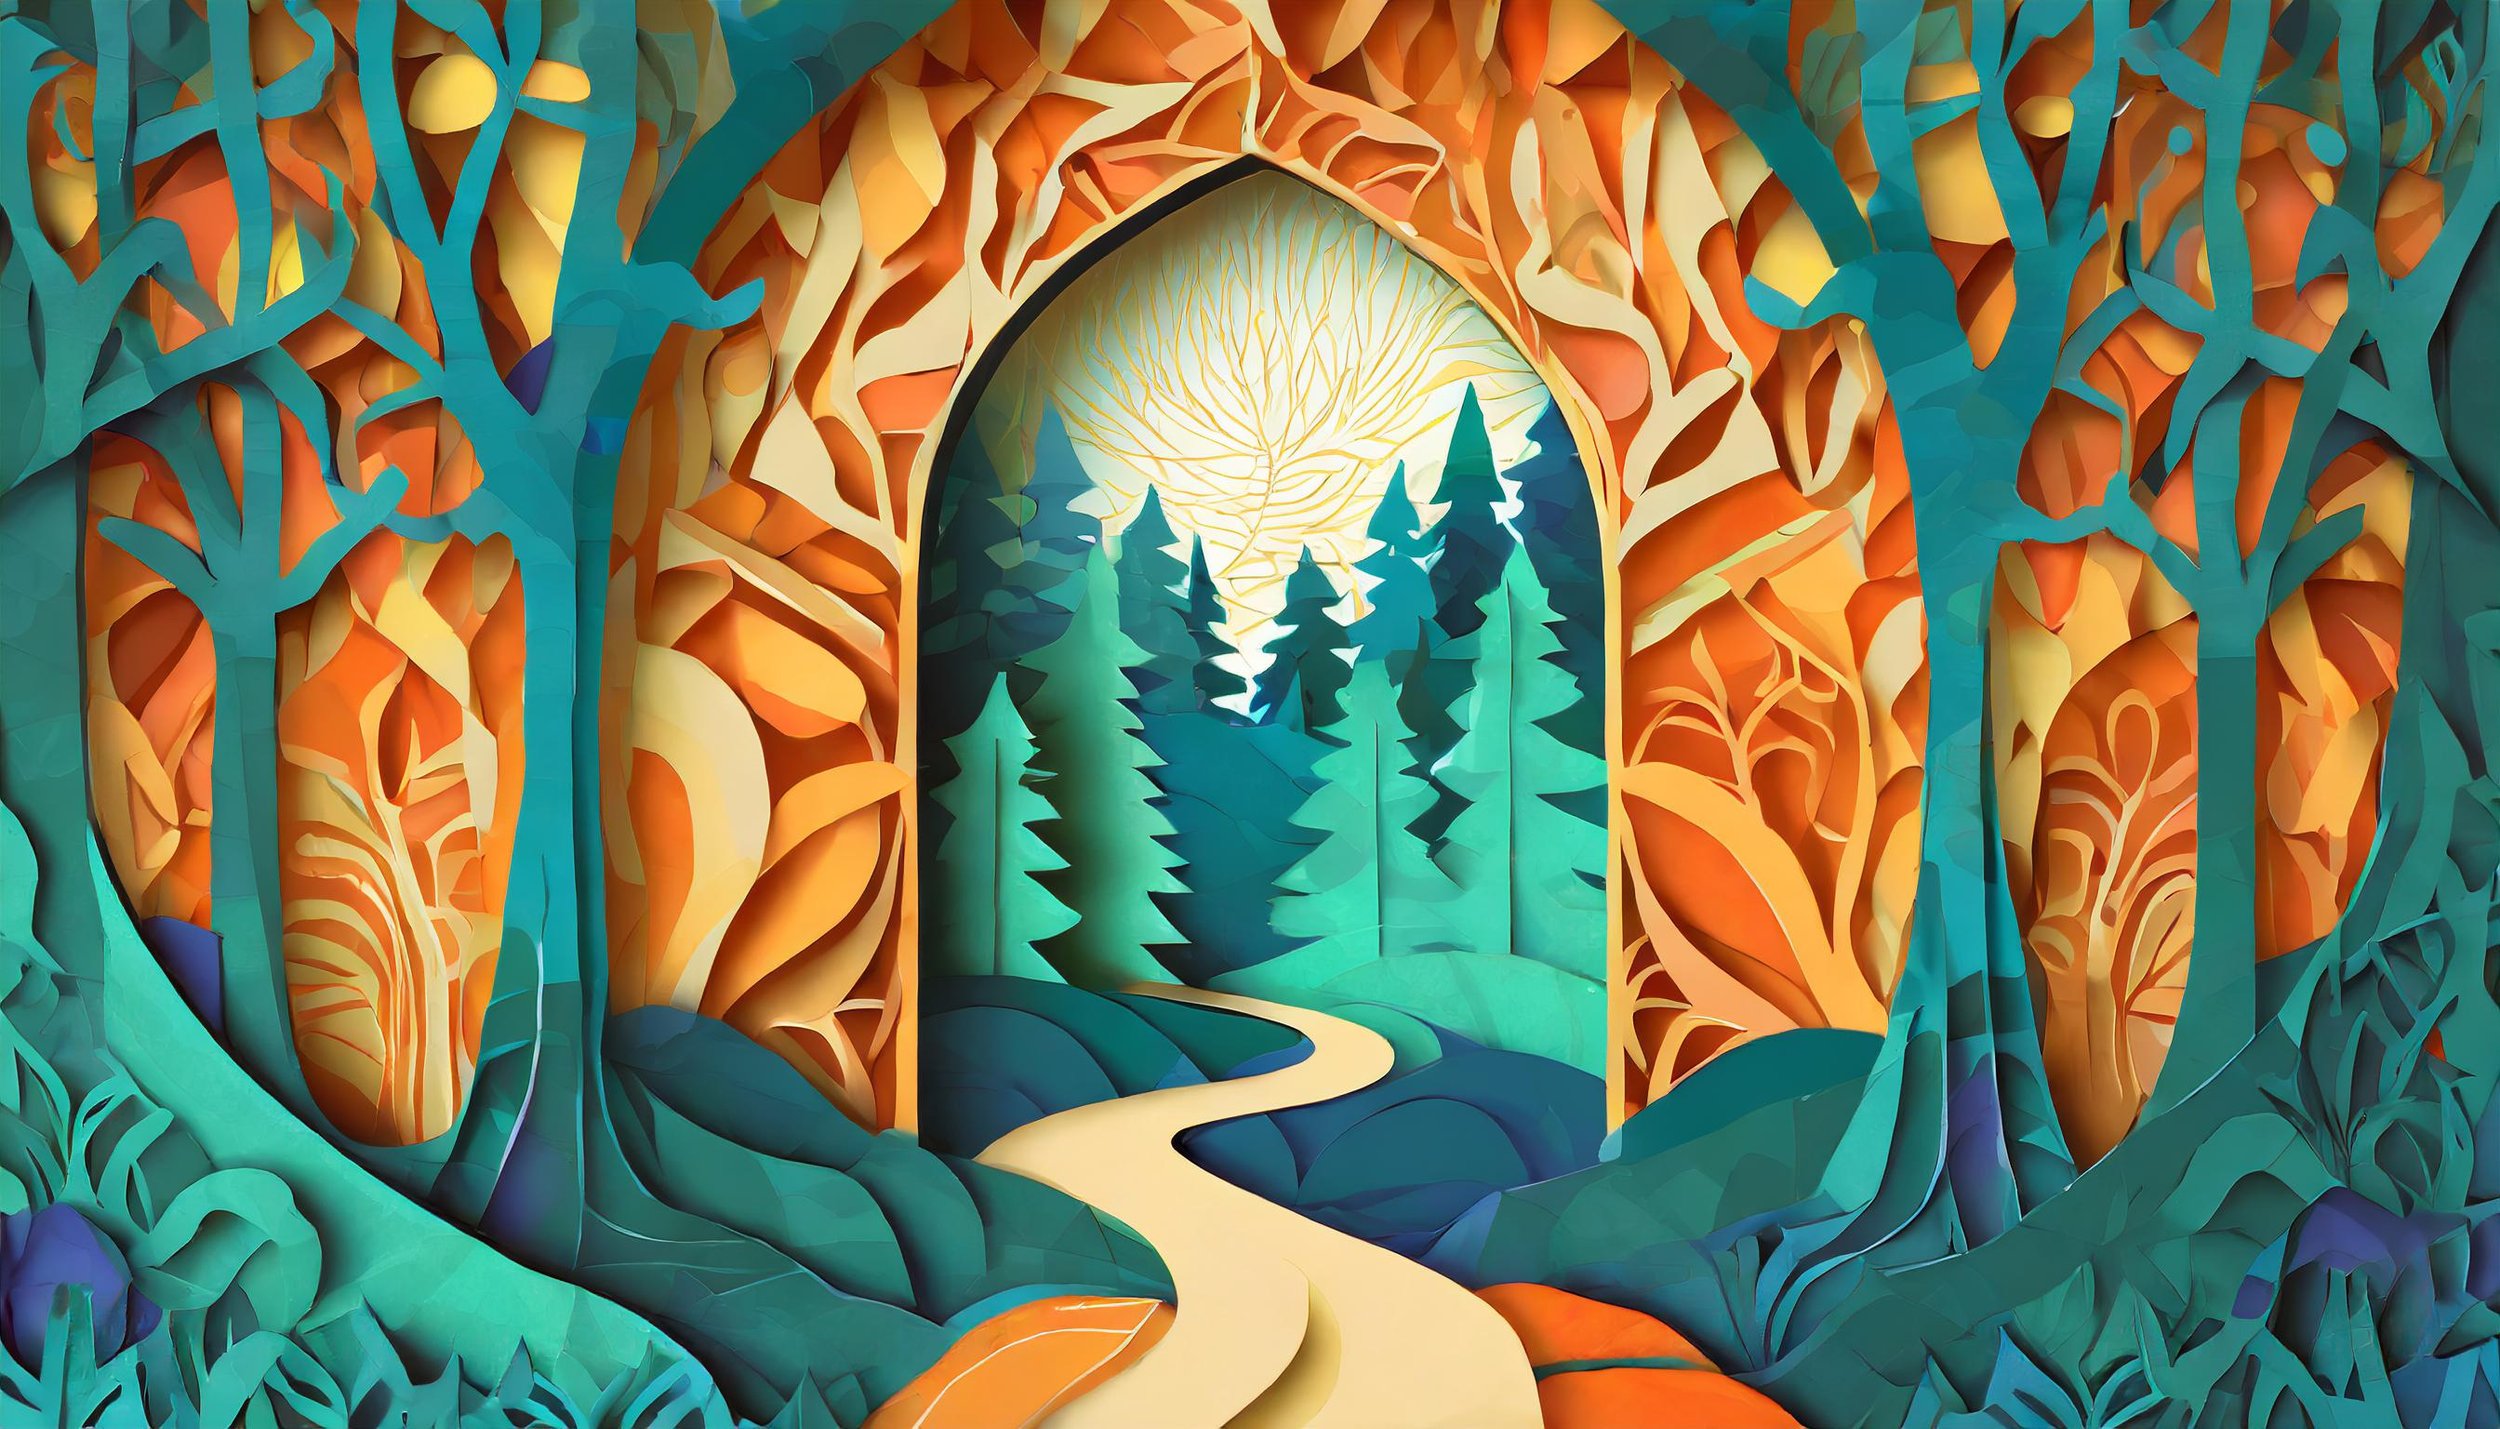 Firefly flat illustration of the entrance to a medieval forest 15205.jpg